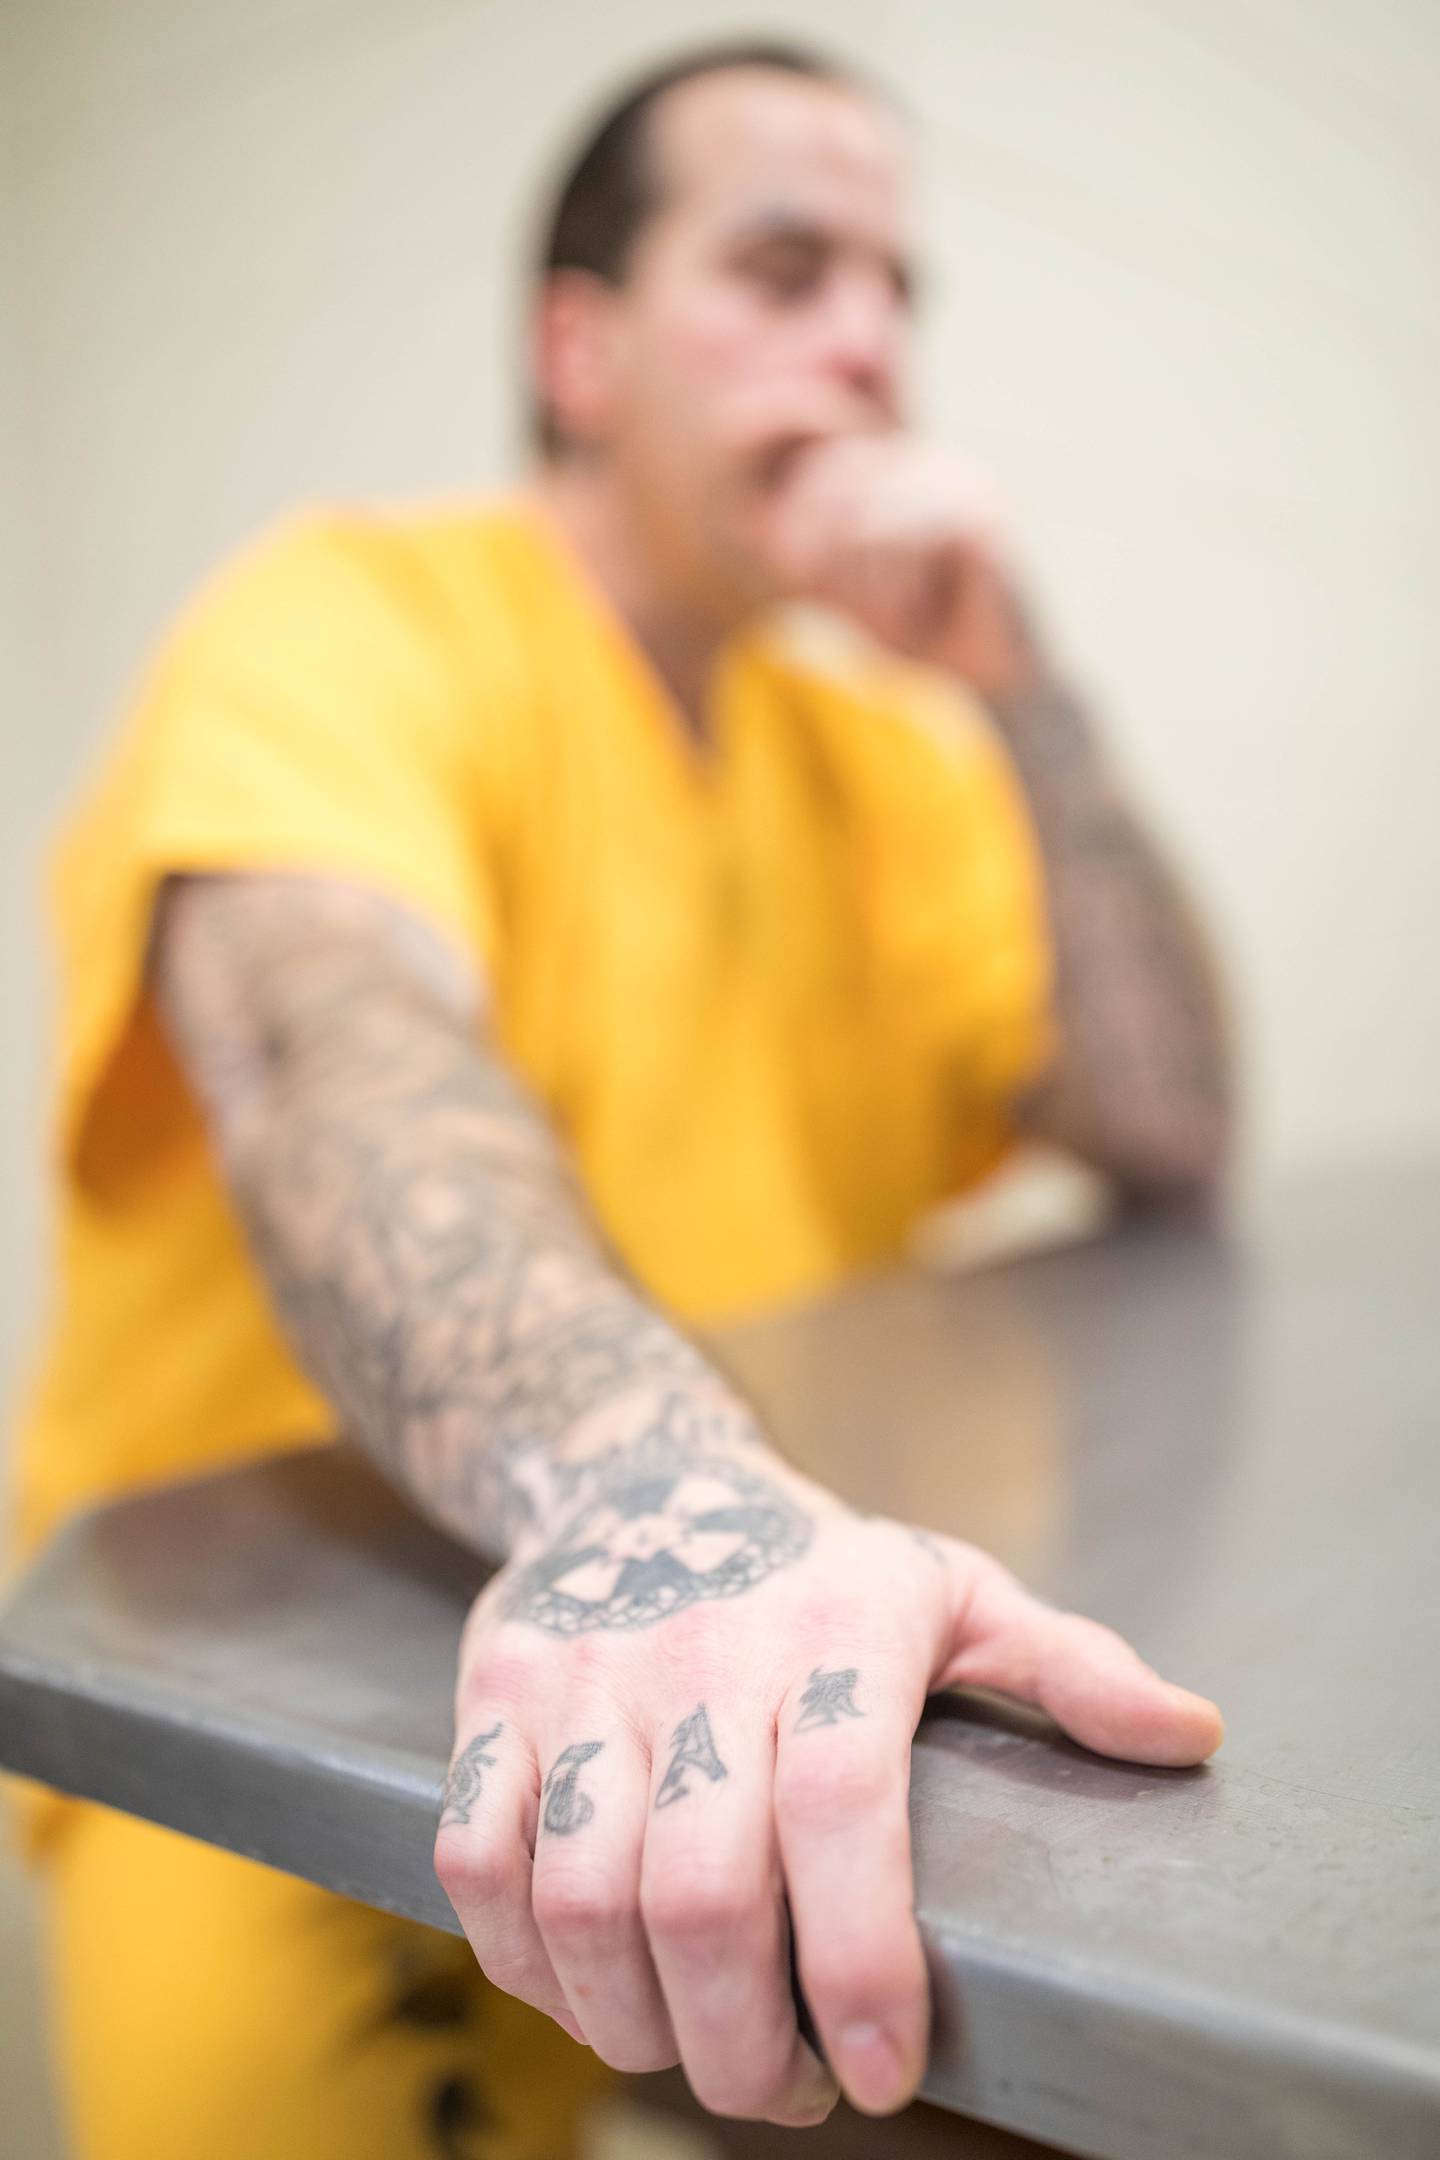 Anchorage Man Who Attacked Sex Offenders Hopes His Story Can Be A Lesson For Others 9425